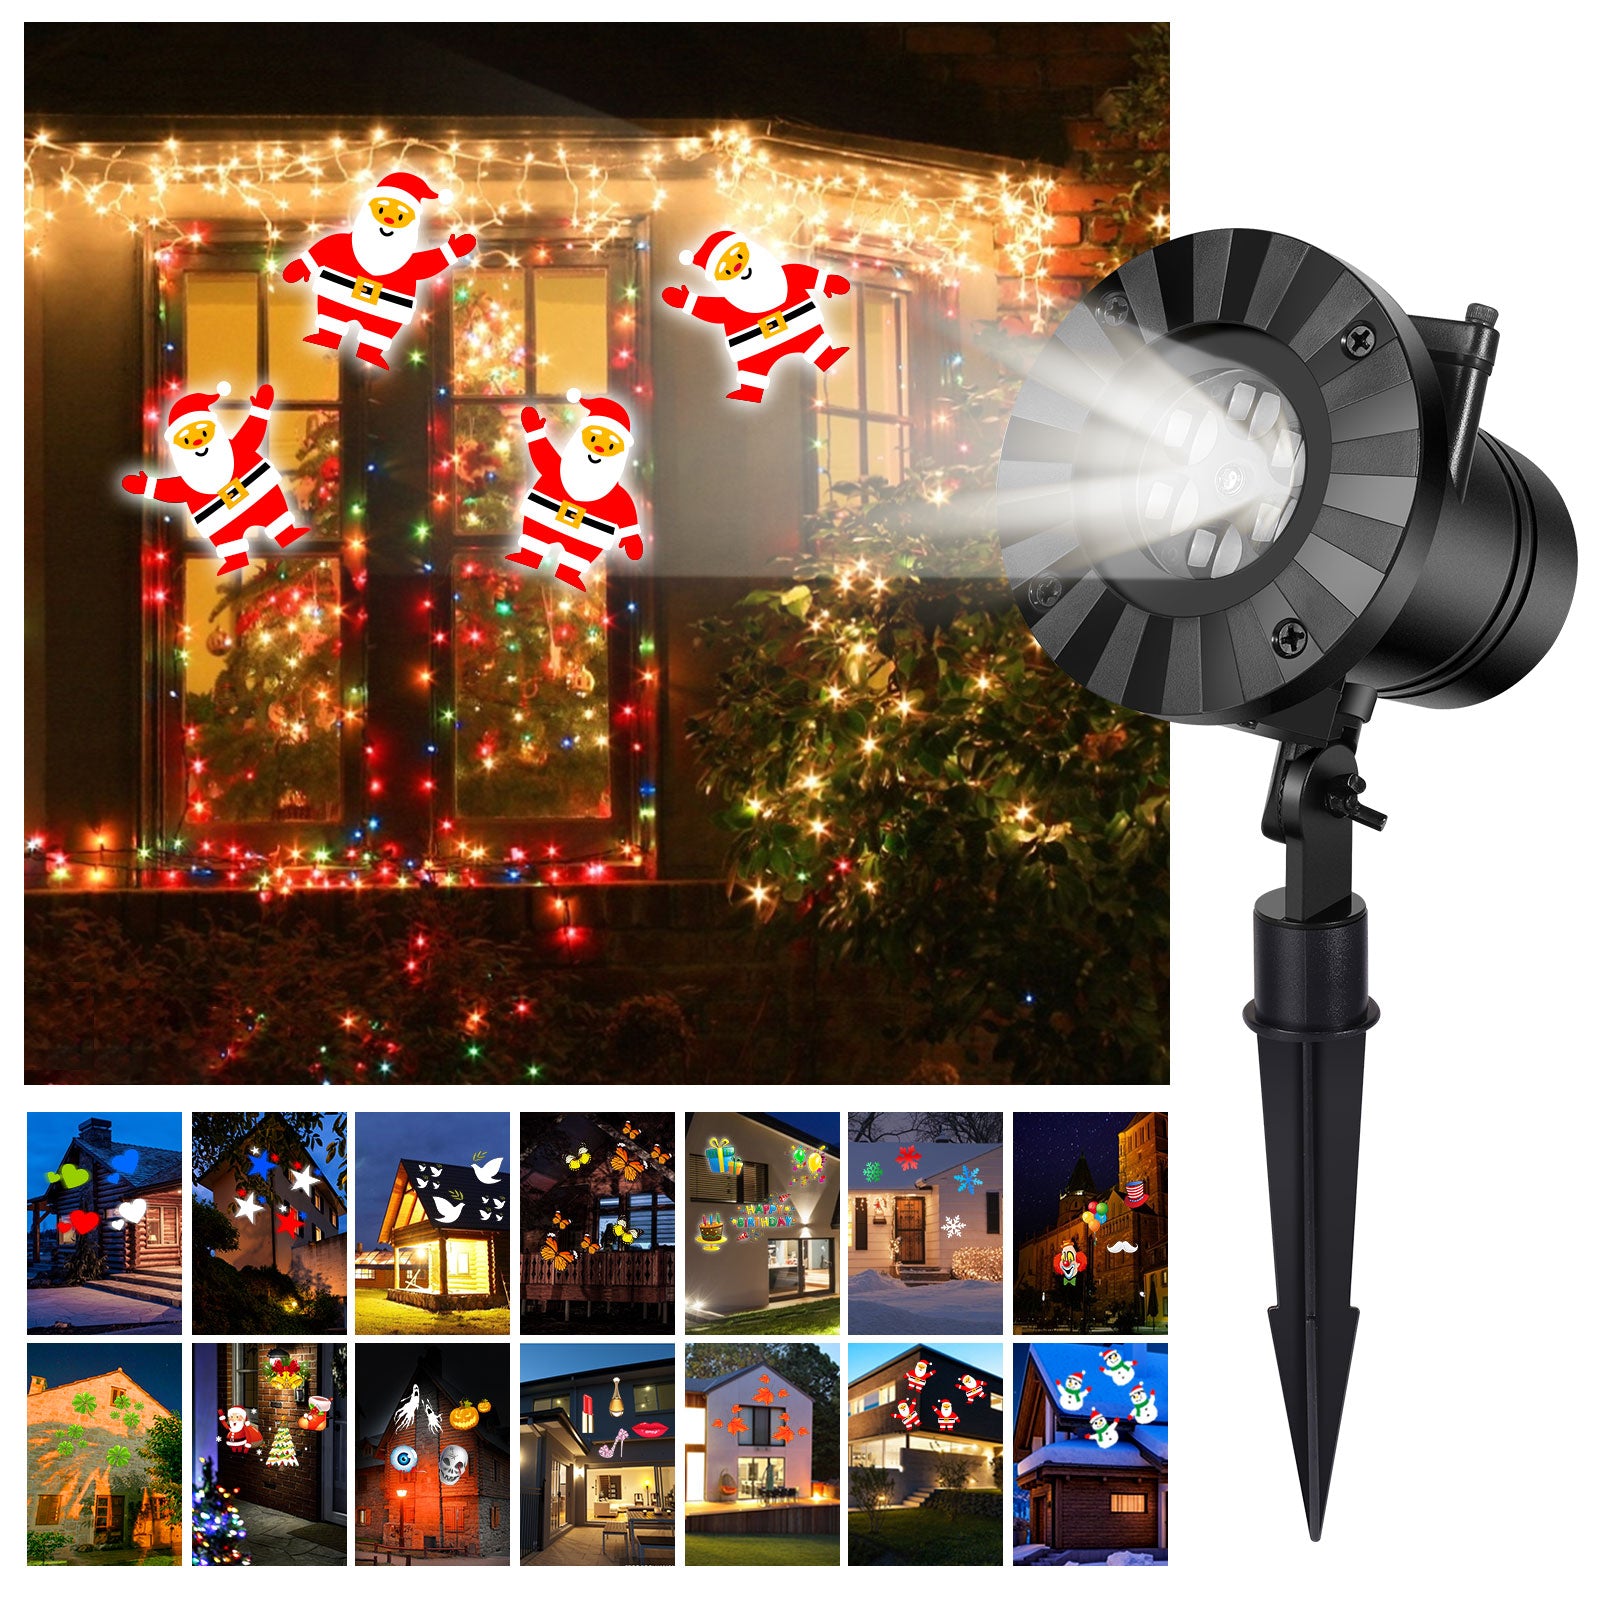 Halloween Christmas Projector Lights Outdoor Moving Snowflake Lights with 14 switchable pattern lenses Waterproof for Holiday Party Garden Wedding Indoor Outdoor Decorations